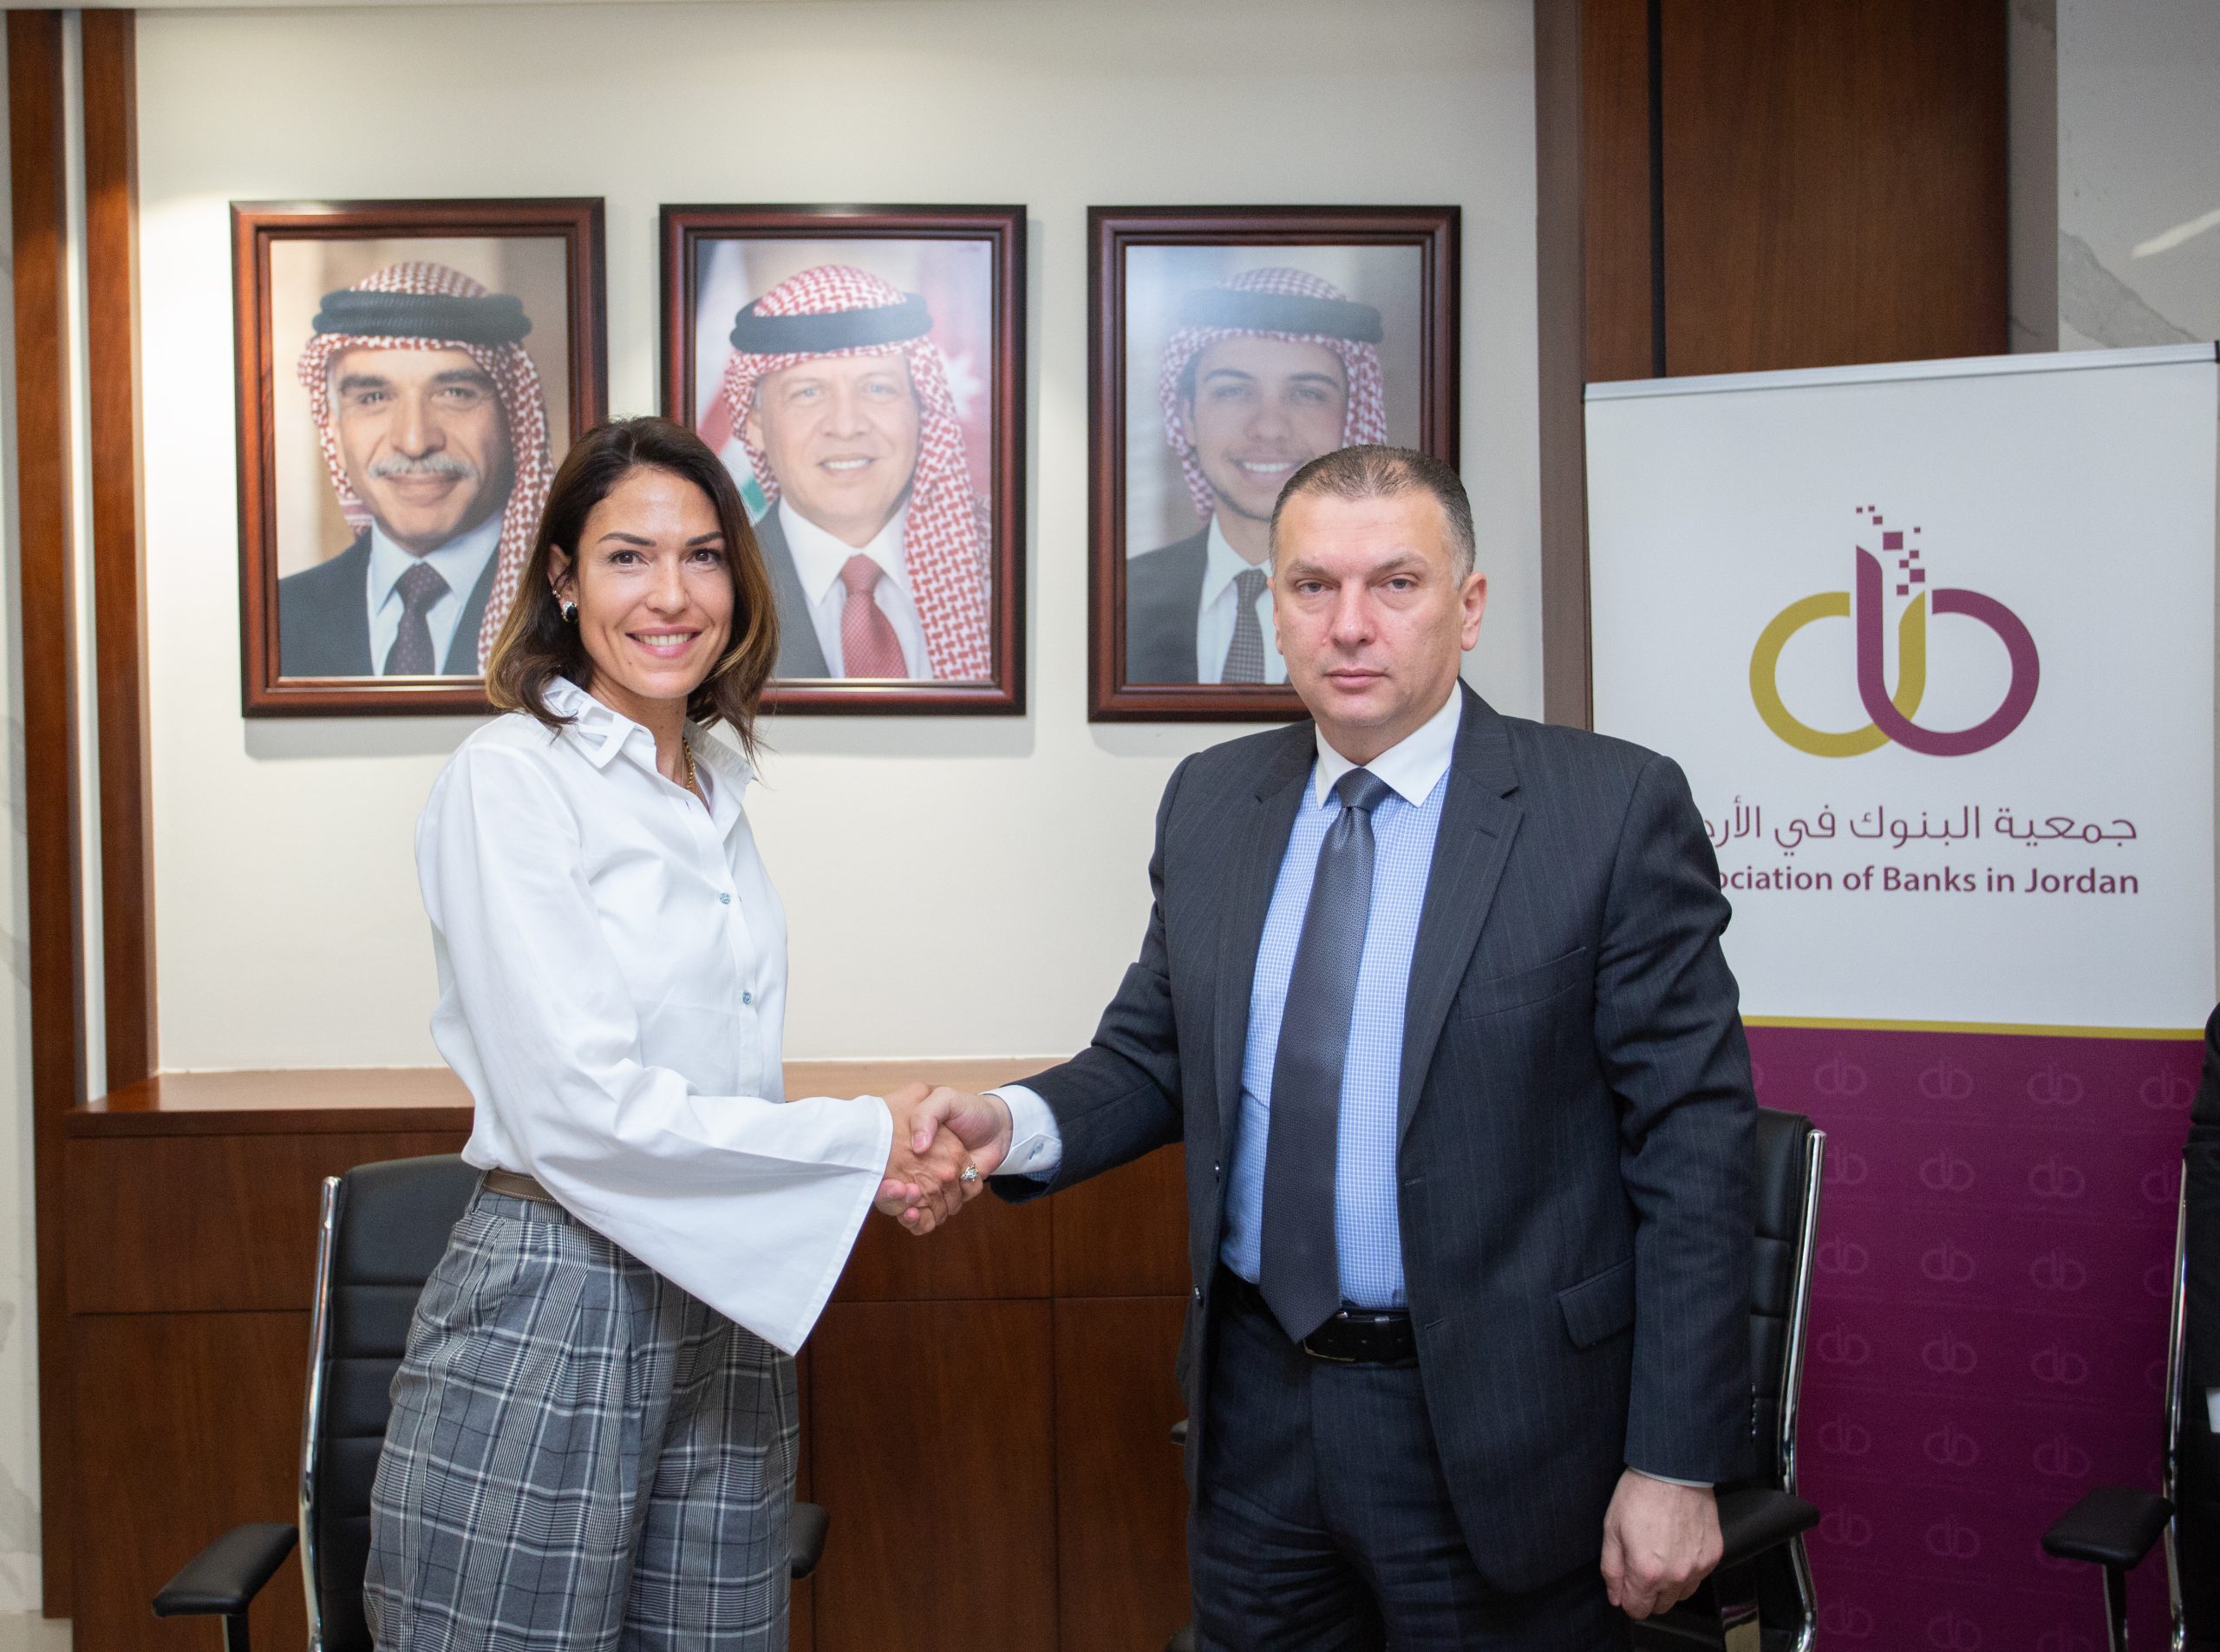 The Association of Banks in Jordan Signs a Memorandum of Understanding with Terra for Electronic Waste Recycling